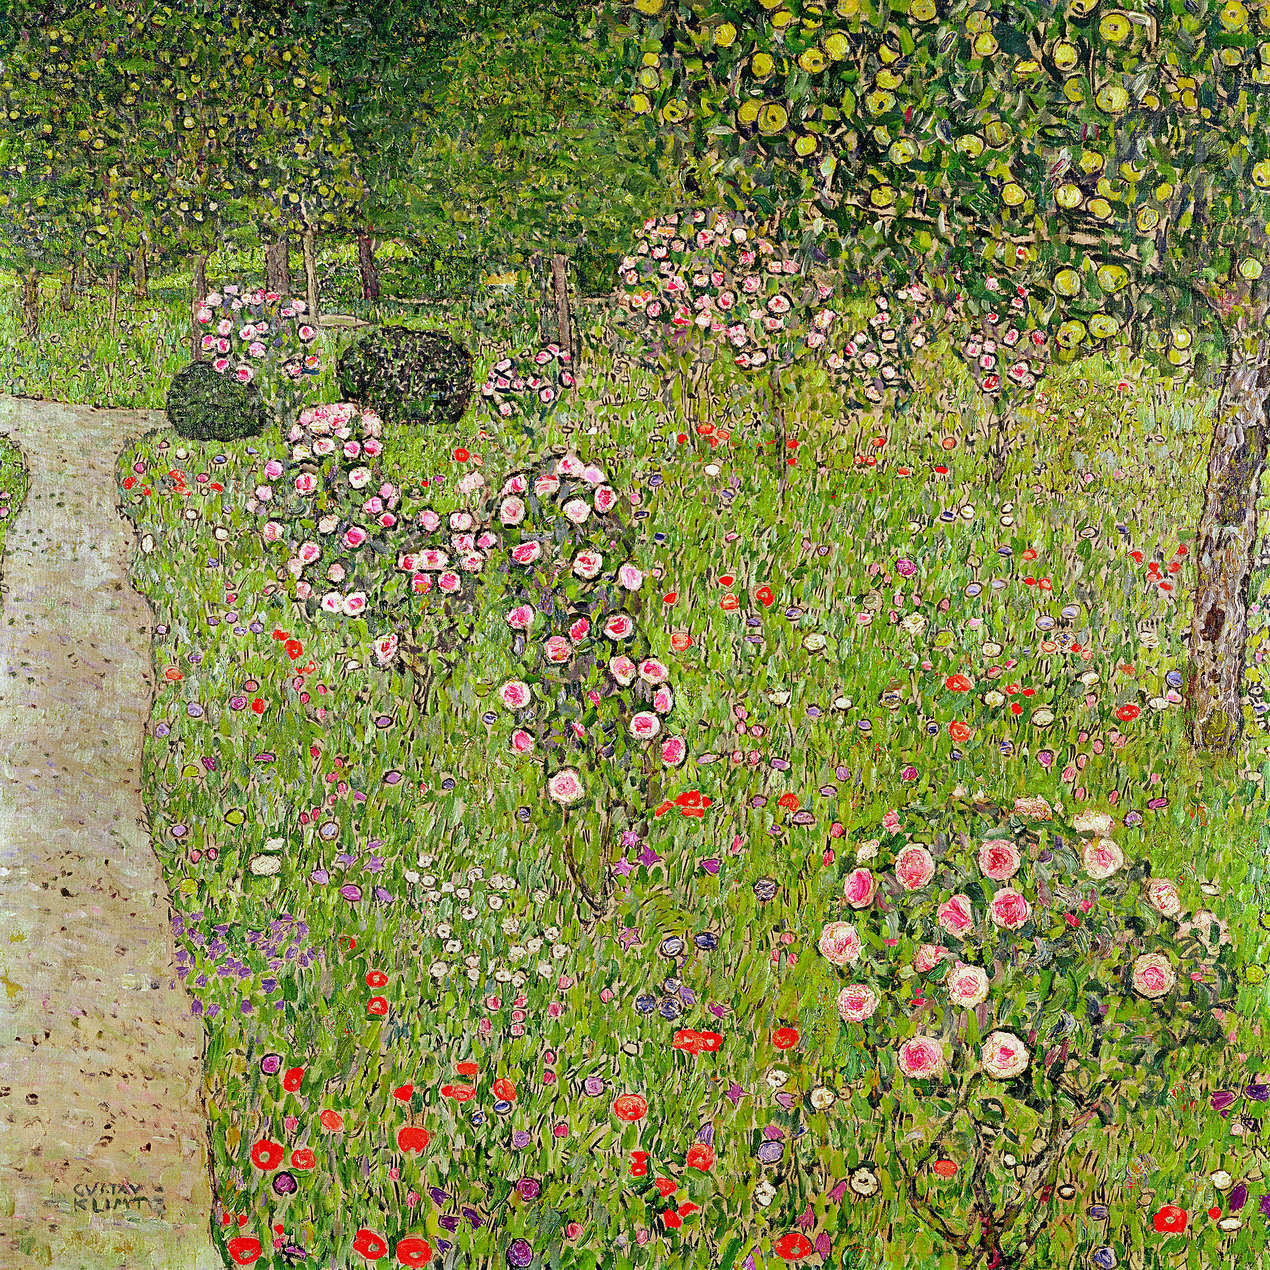             Photo wallpaper "Orchard with roses" by Gustav Klimt
        